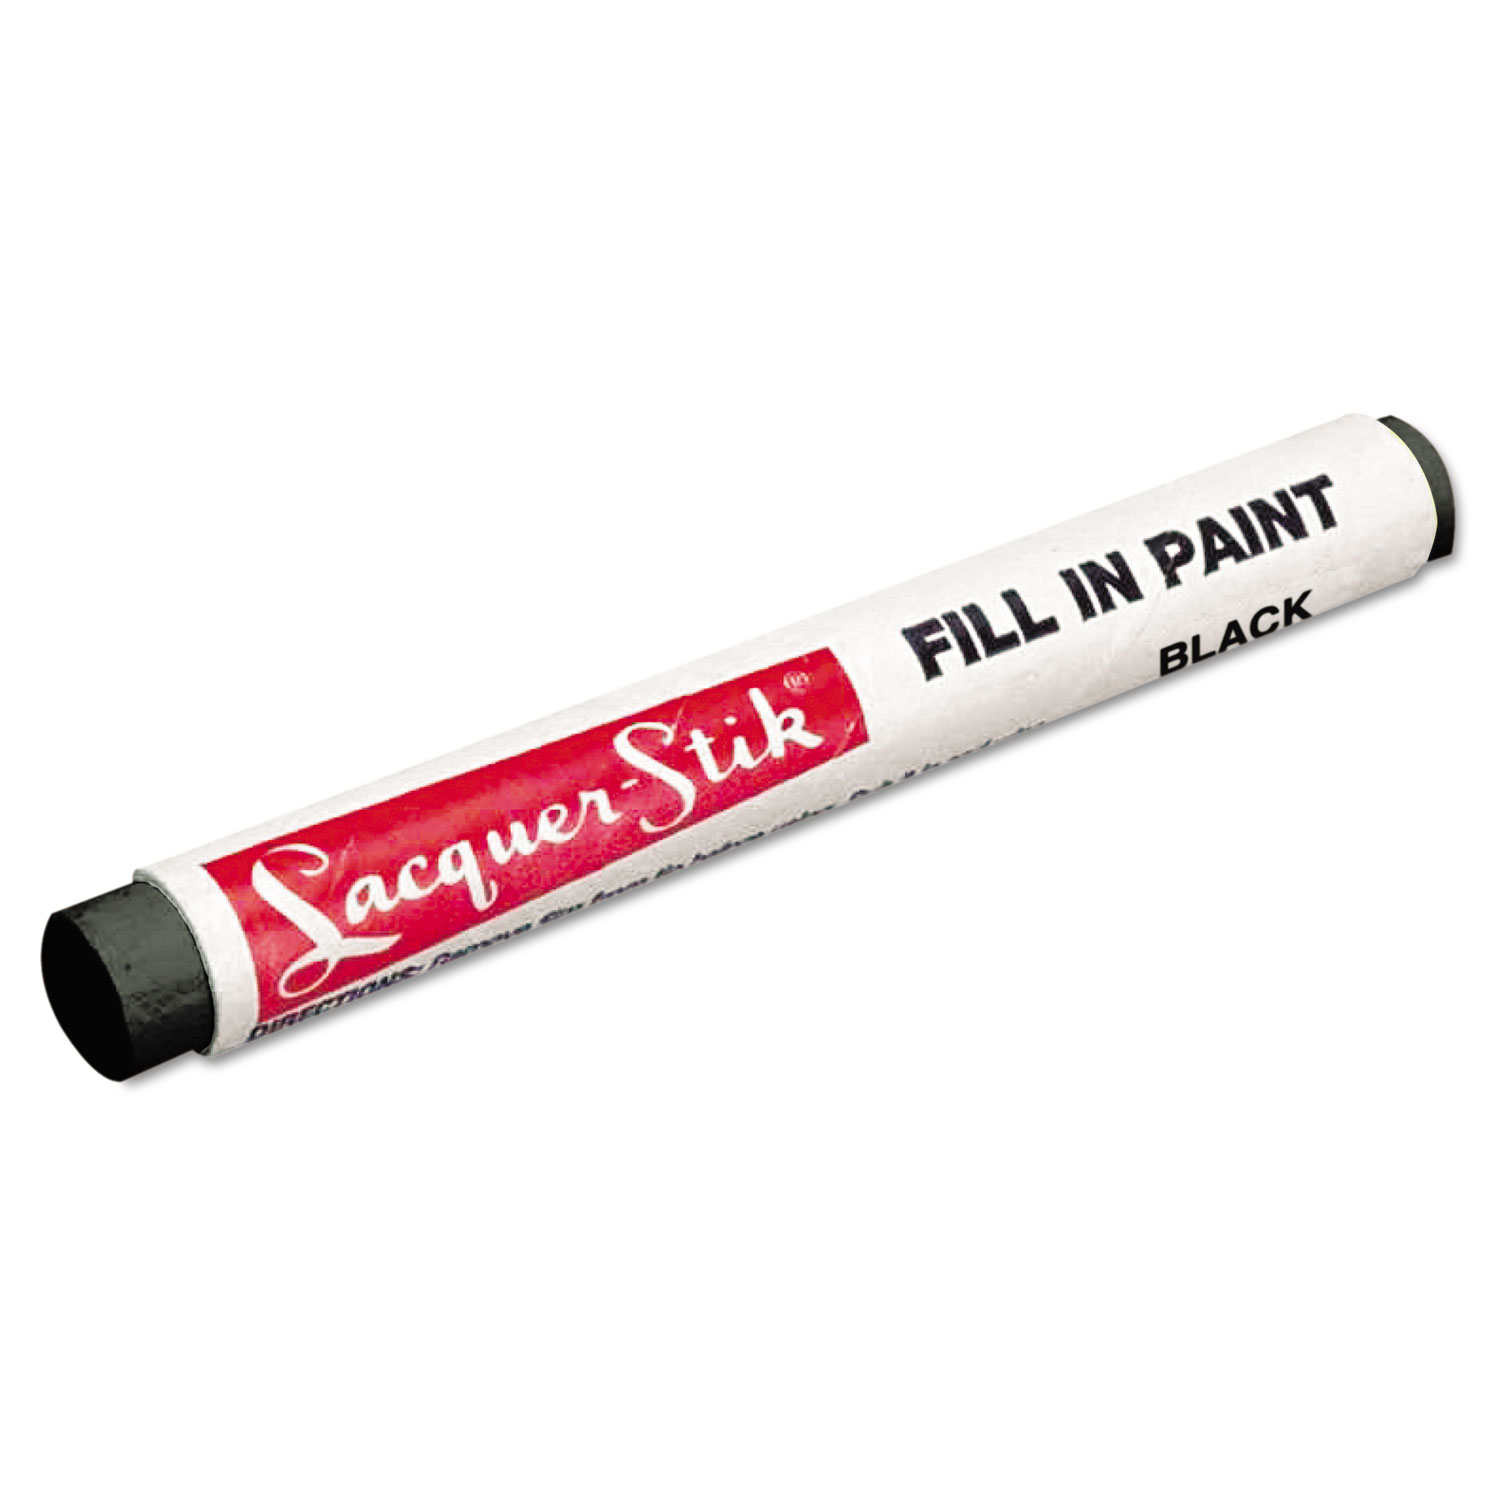 Lacquer-Stik Fill-In Paint Marker 51123, Broad Bullet Tip, Black